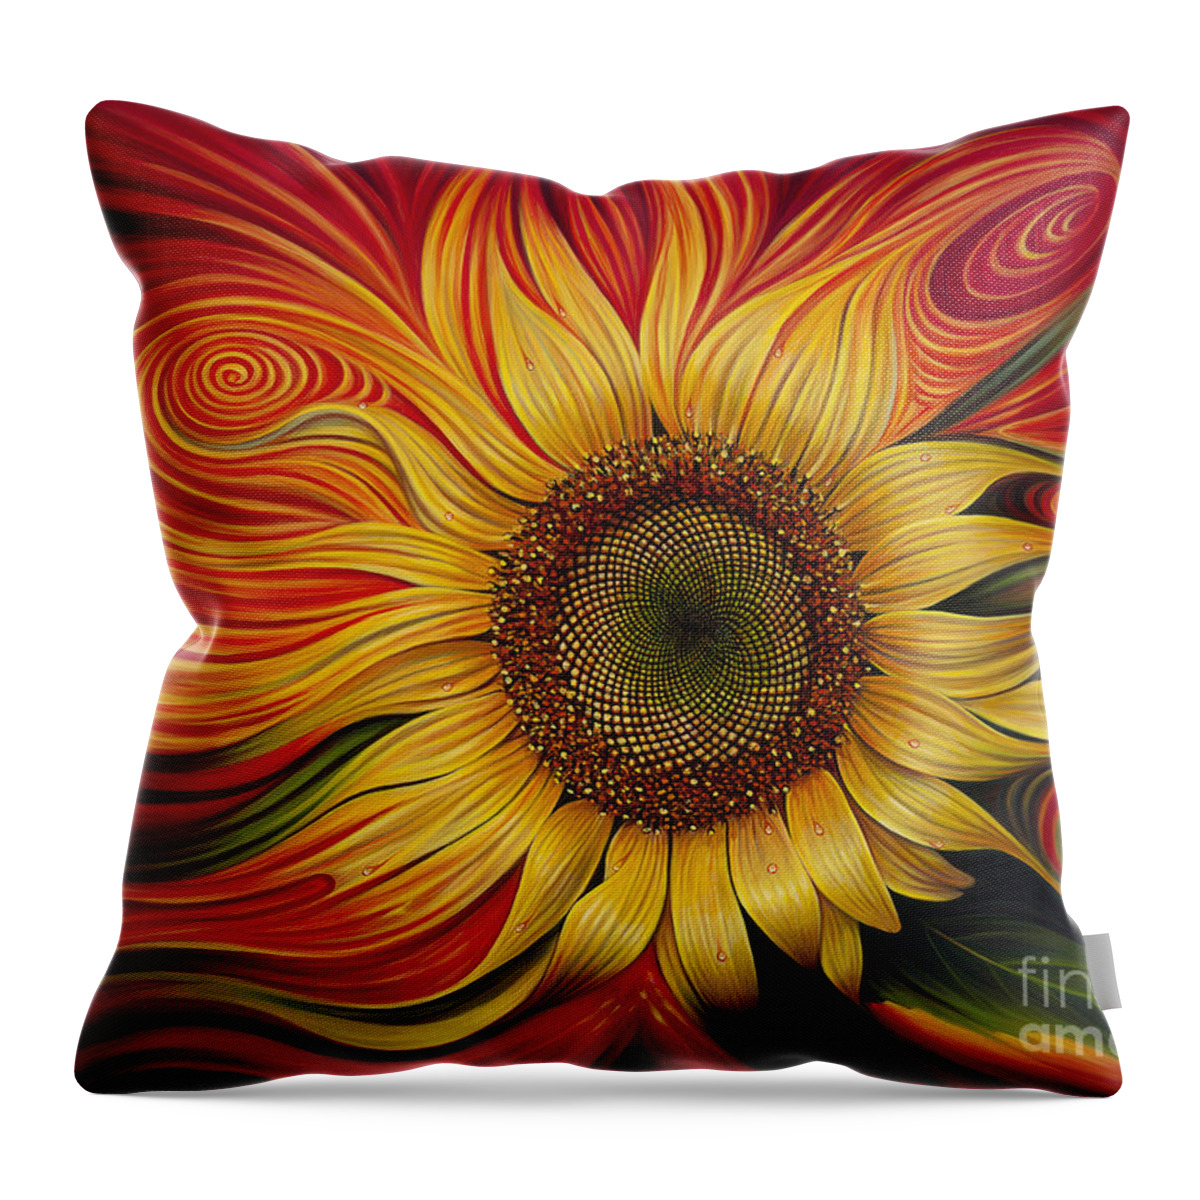 Sunflower Throw Pillow featuring the painting Girasol Dinamico by Ricardo Chavez-Mendez